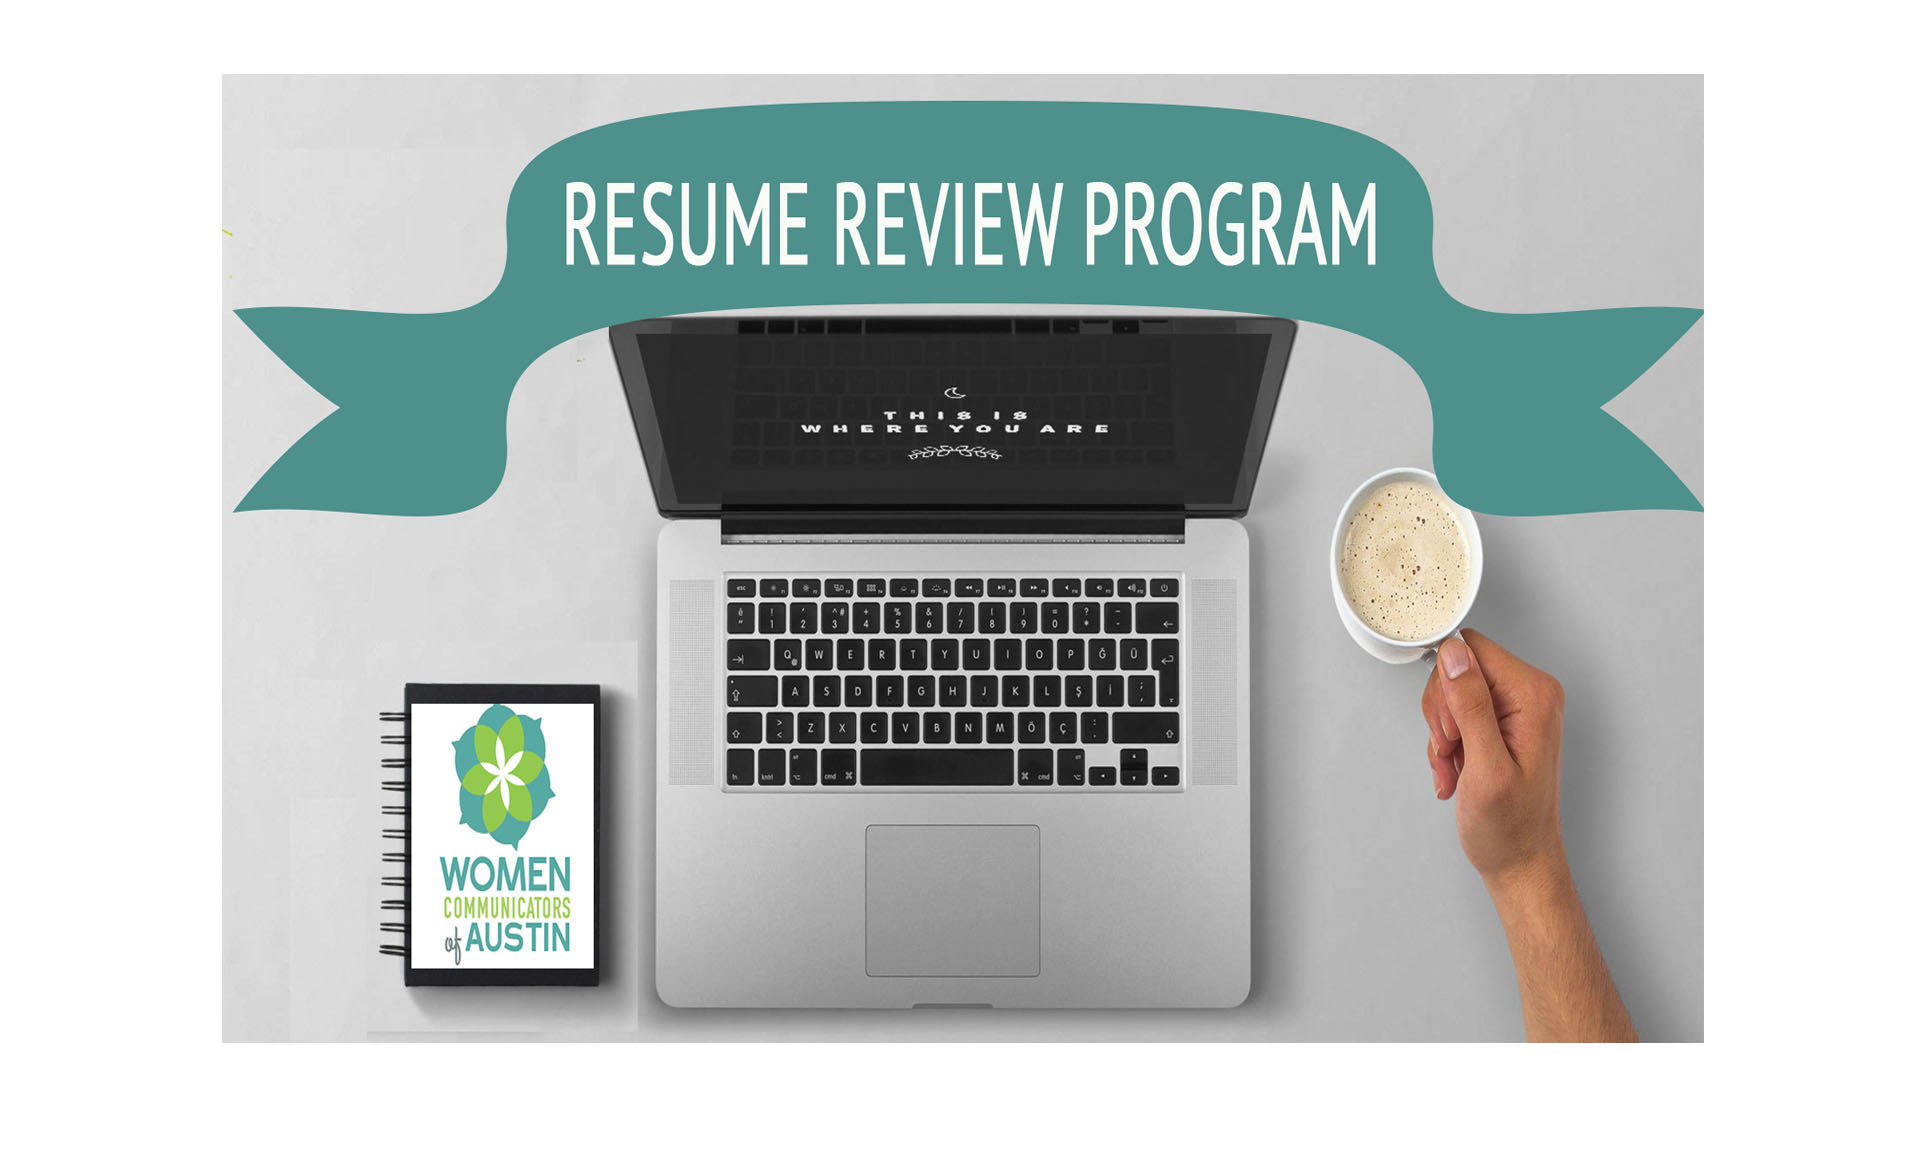 Did You Know? Resume Review Program